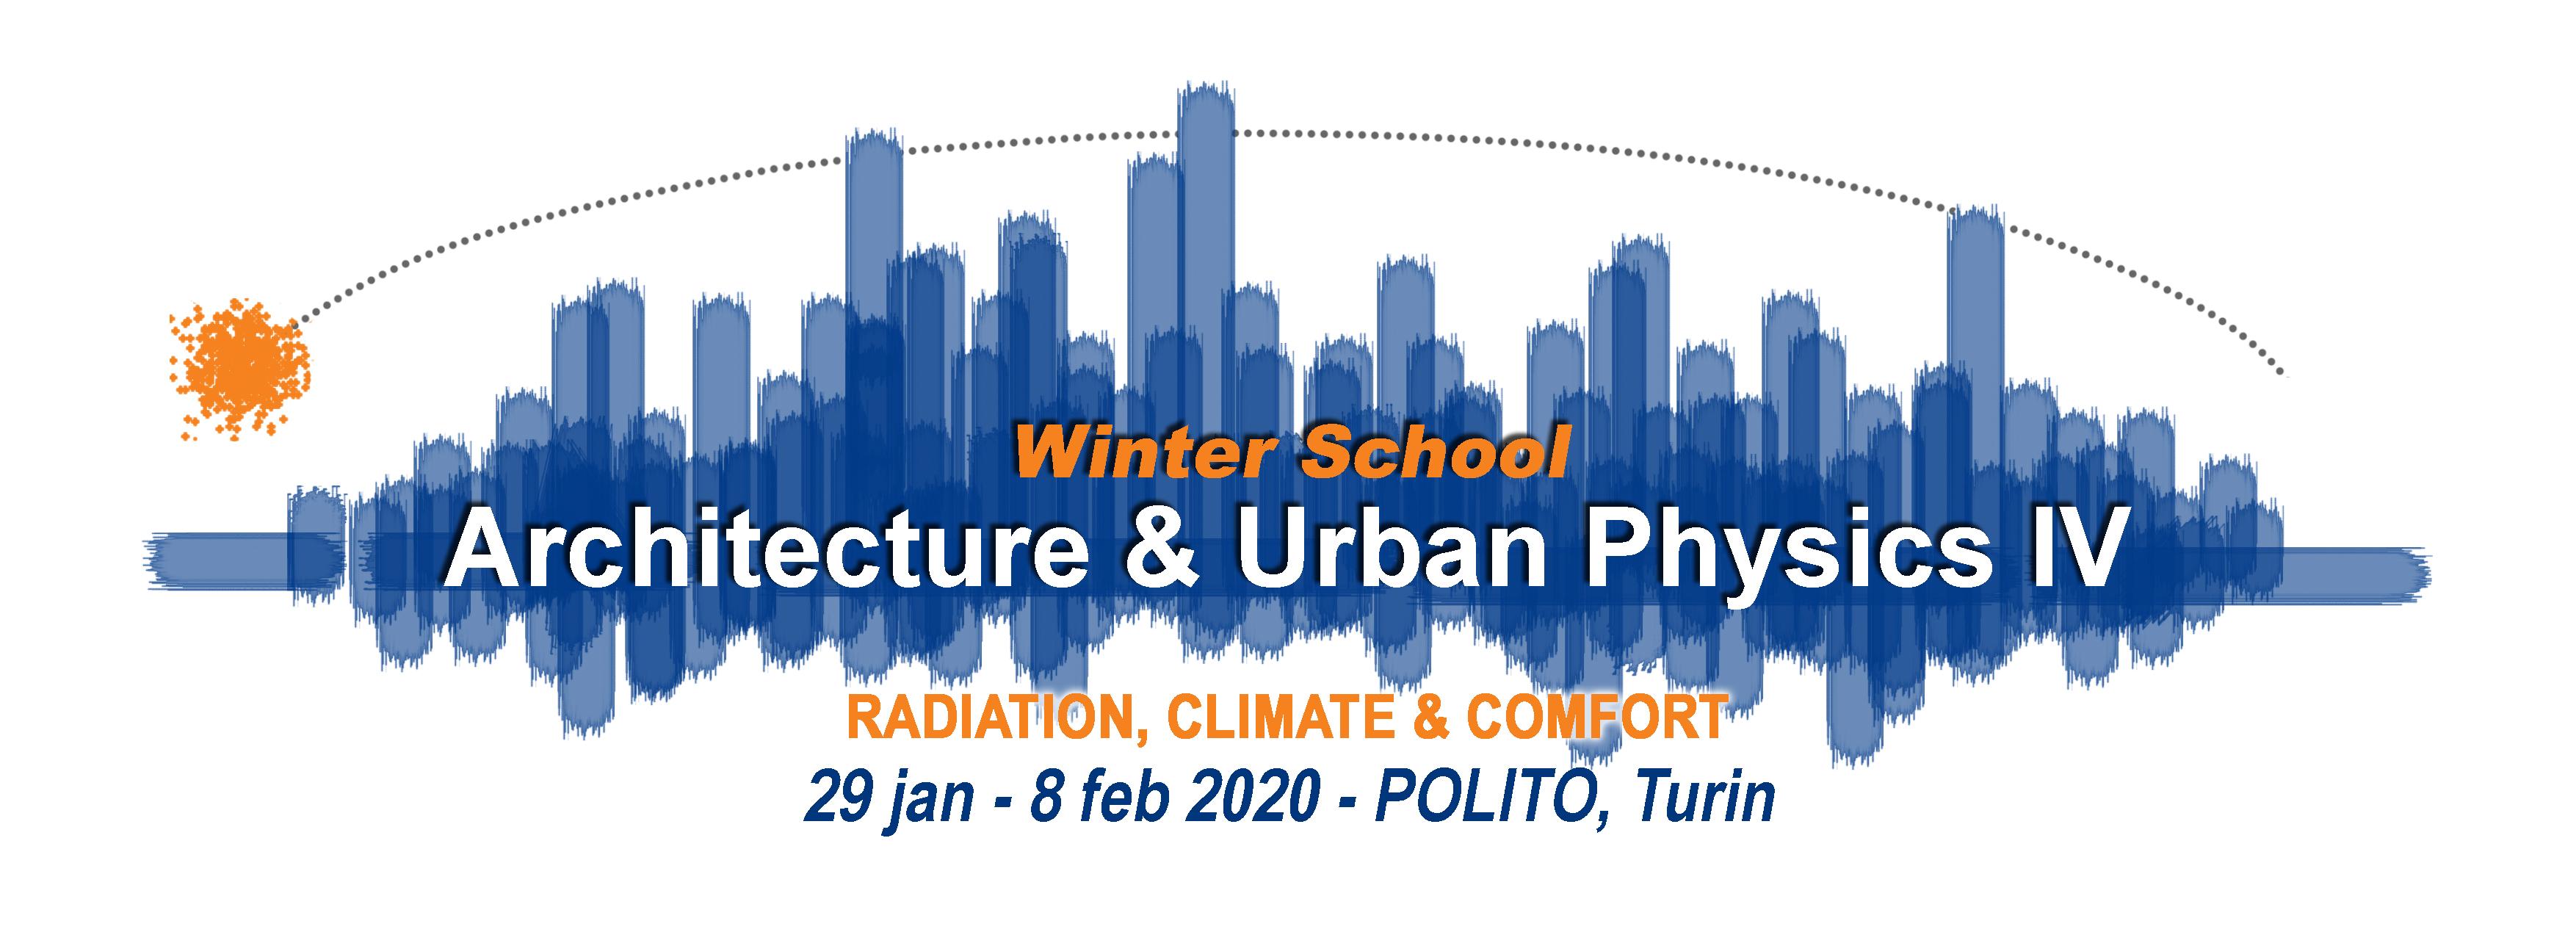 SS2020_Architecture_and_urban_physics - banner.jpg